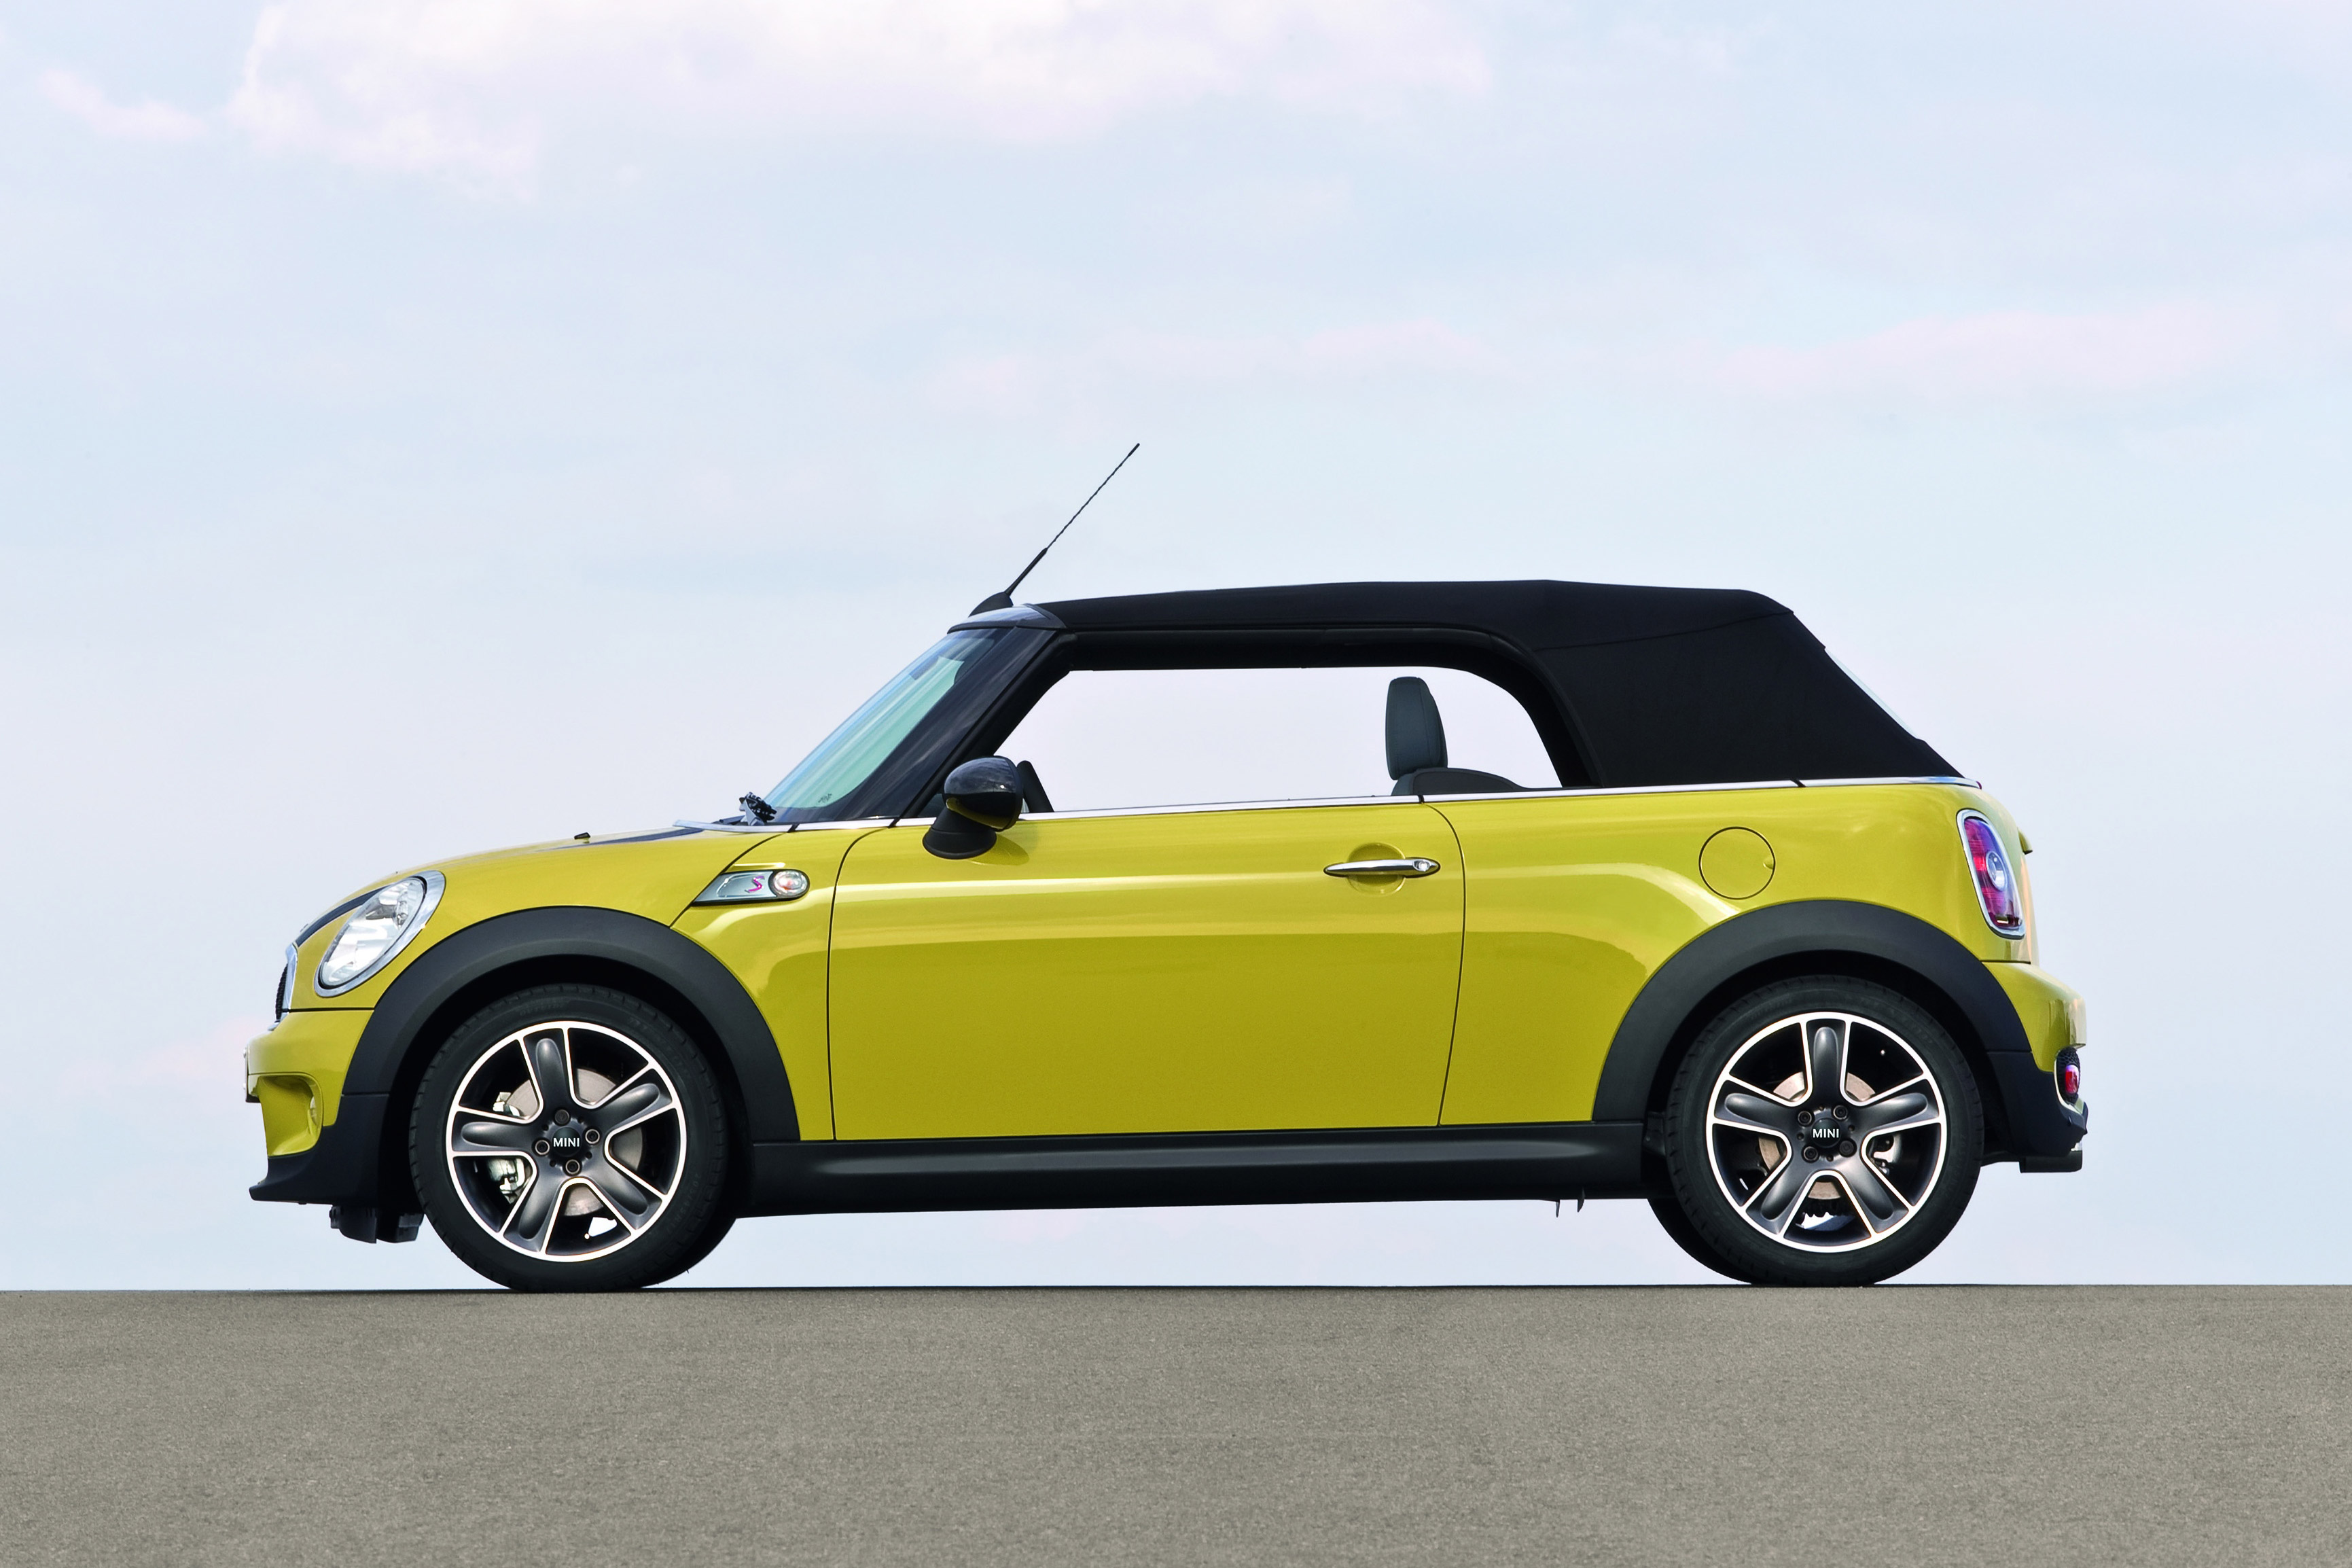 New MINI Convertible price, specs, release date Carbuyer